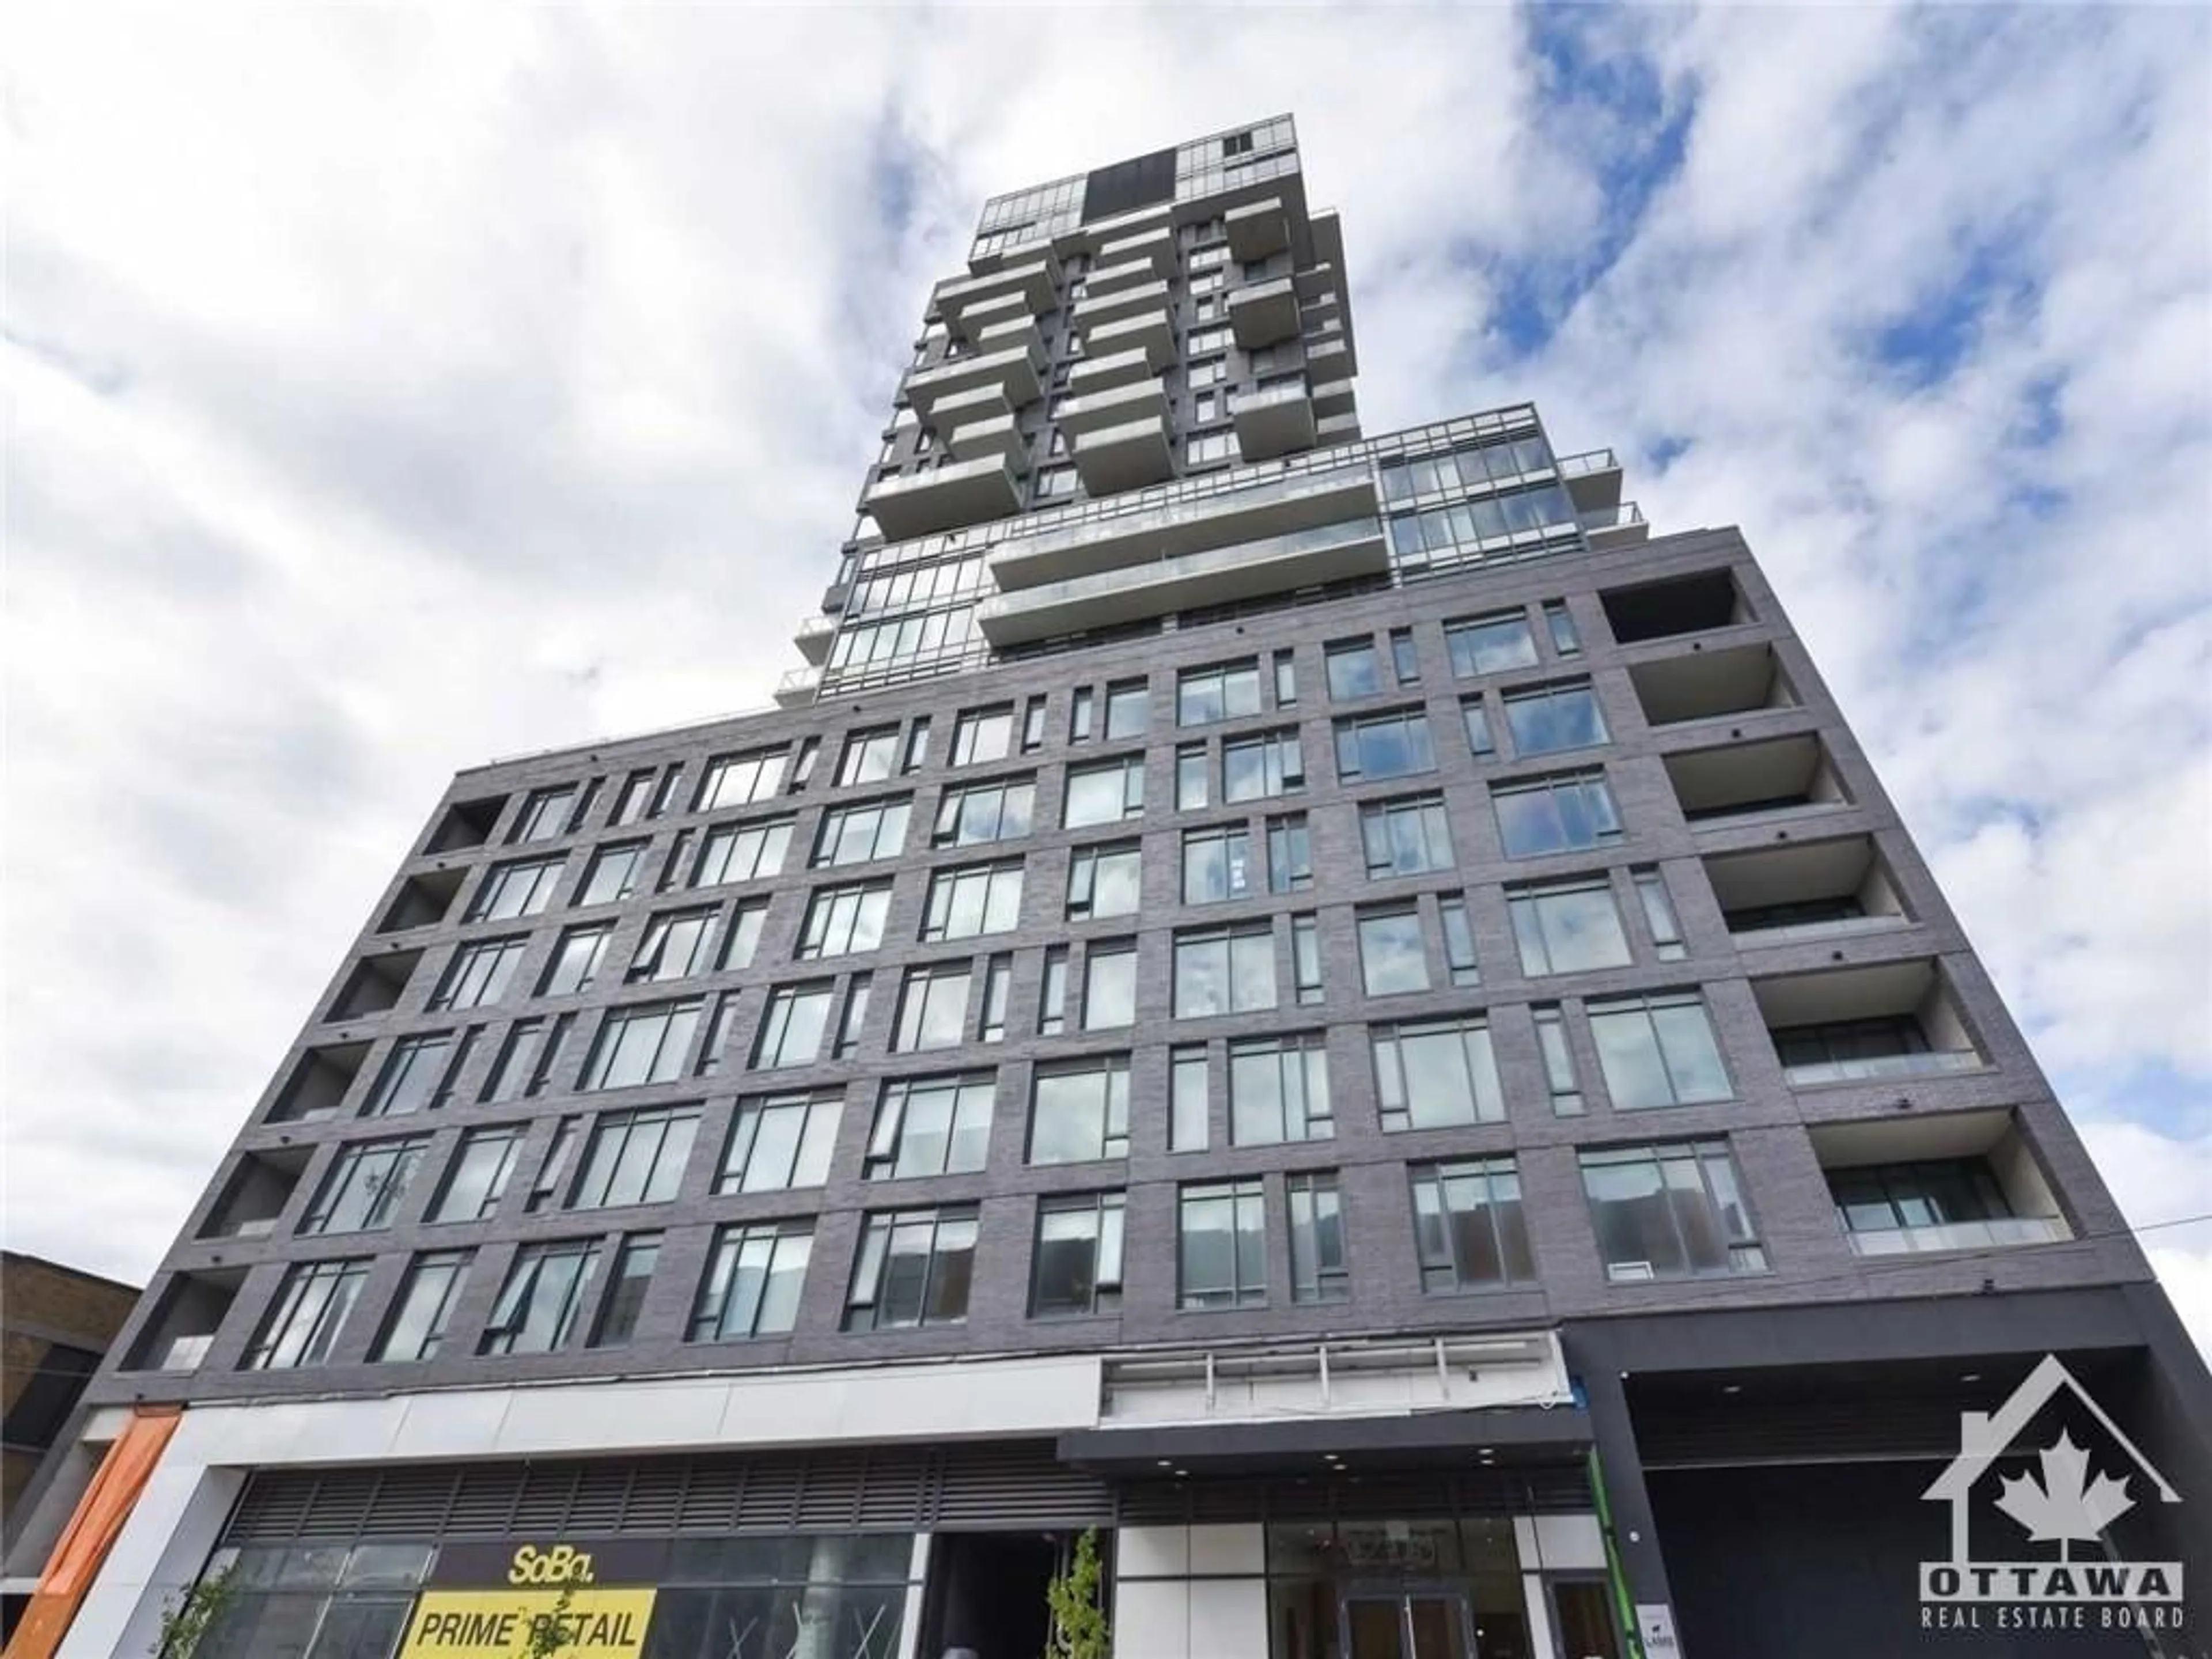 A pic from exterior of the house or condo for 203 CATHERINE St #614, Ottawa Ontario K2P 1C3